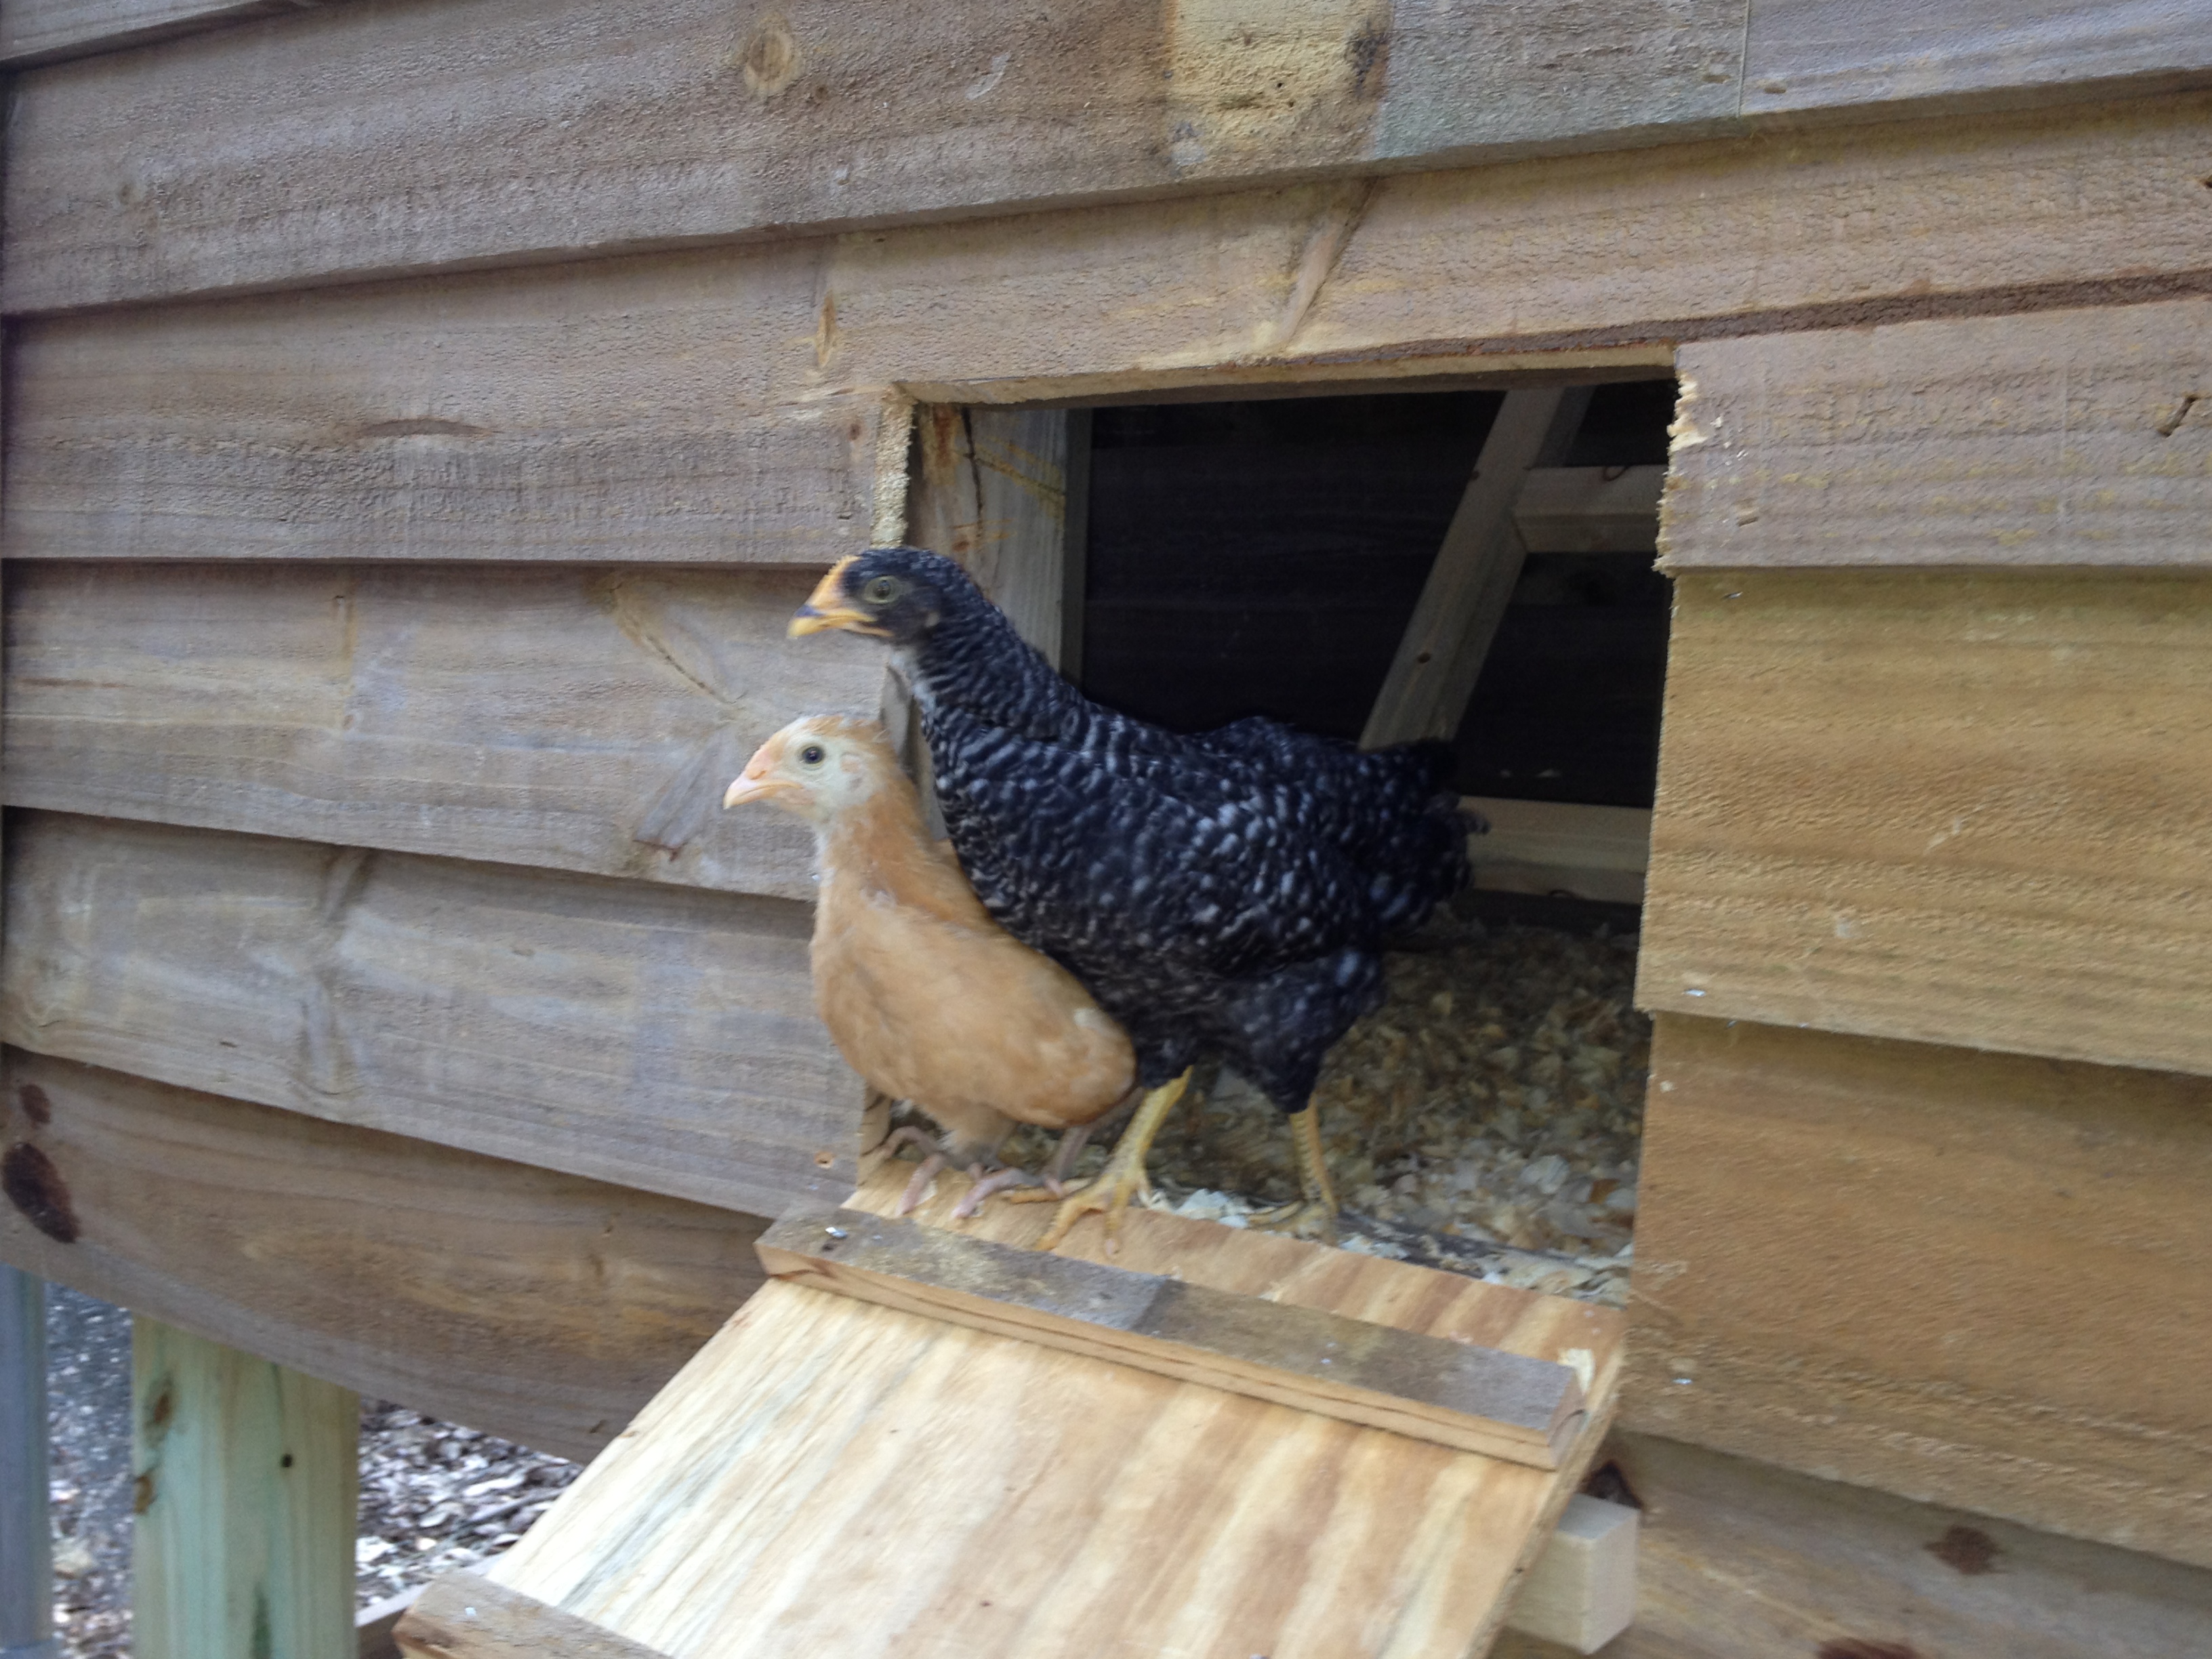 Attila and Annie coming out of the coop